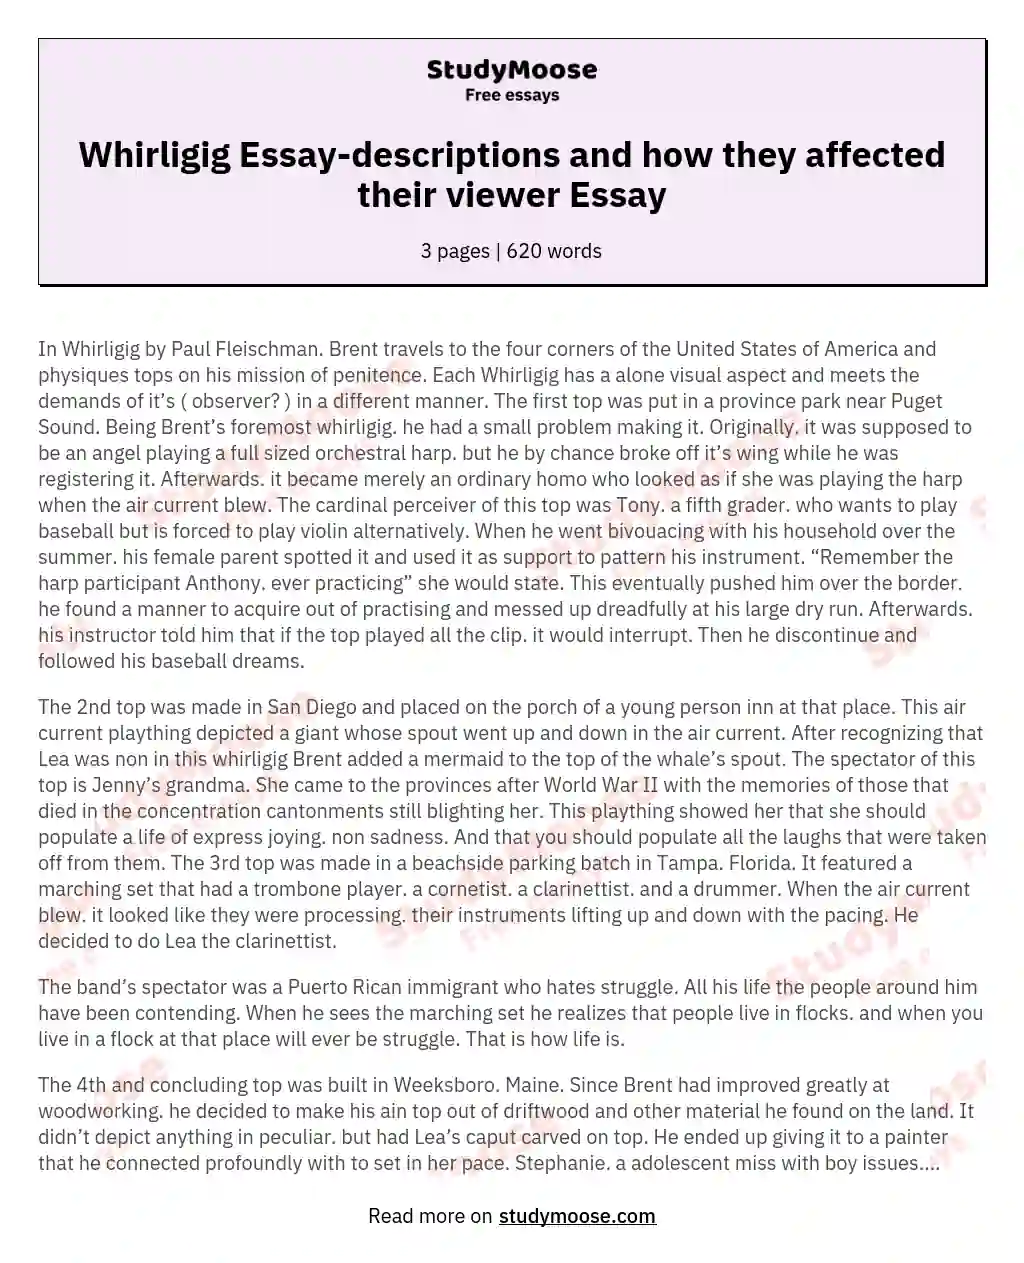 Whirligig Essay-descriptions and how they affected their viewer Essay essay